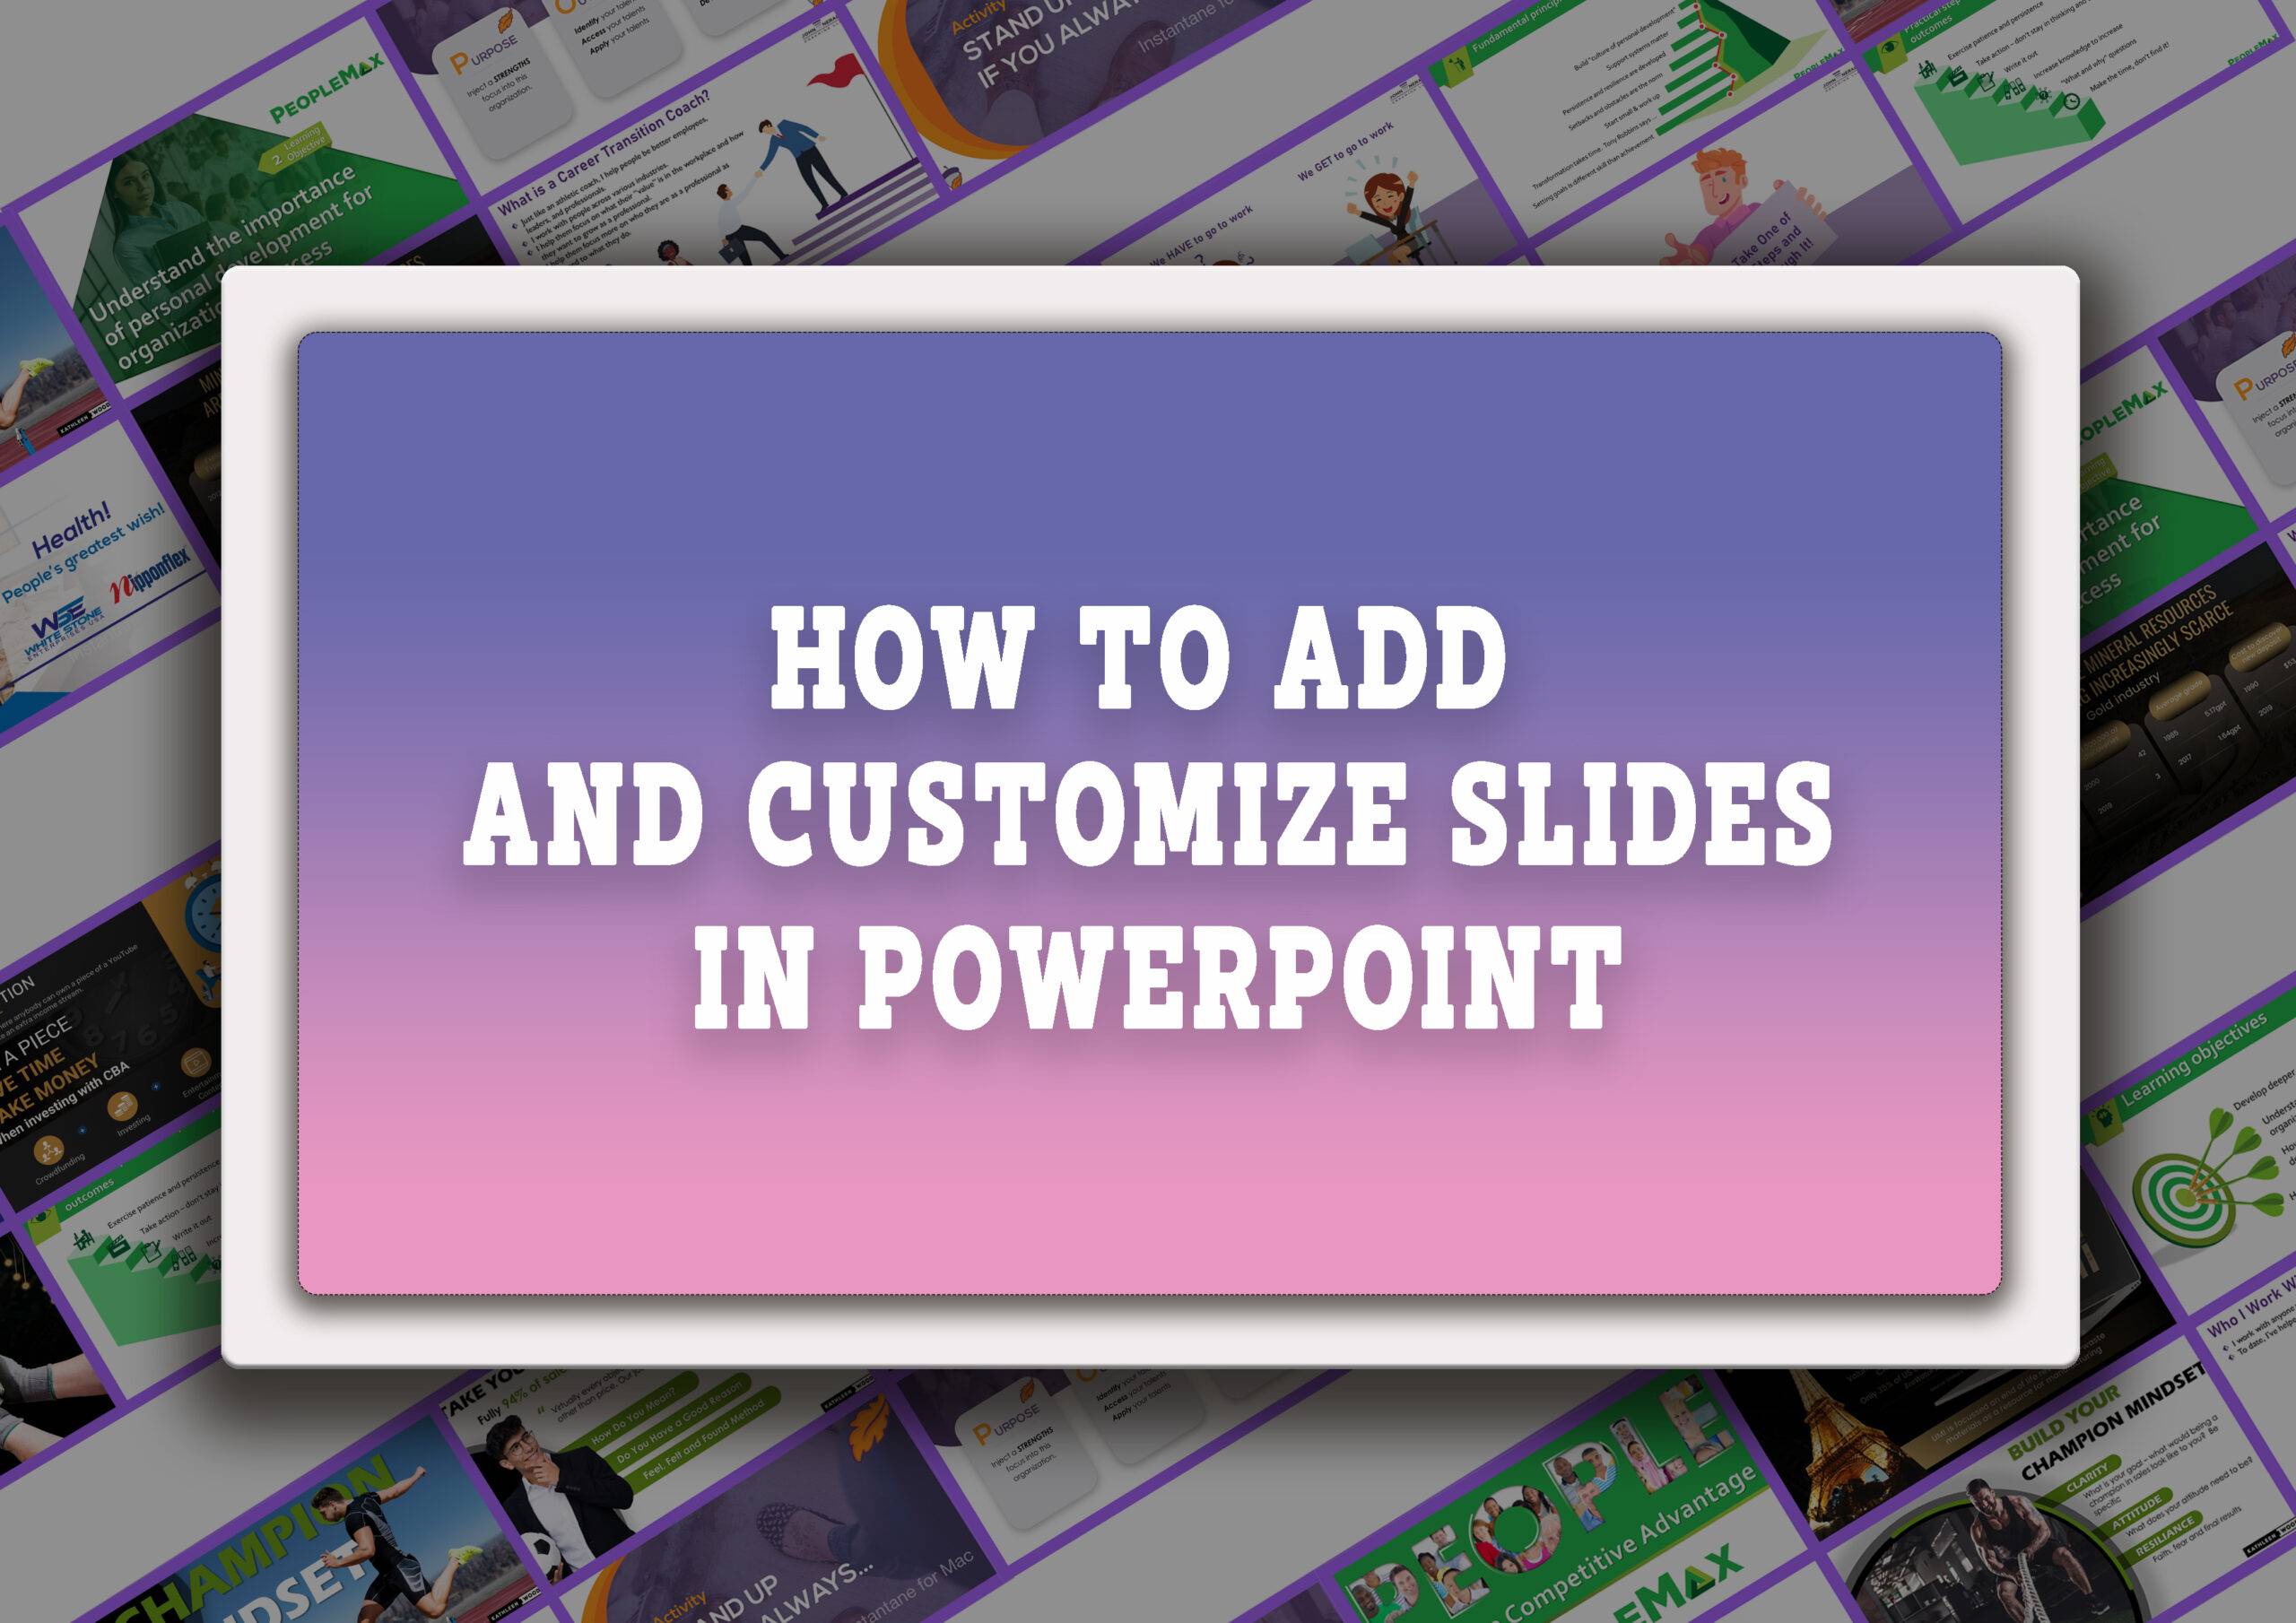 Adding and Customizing slides in PowerPoint